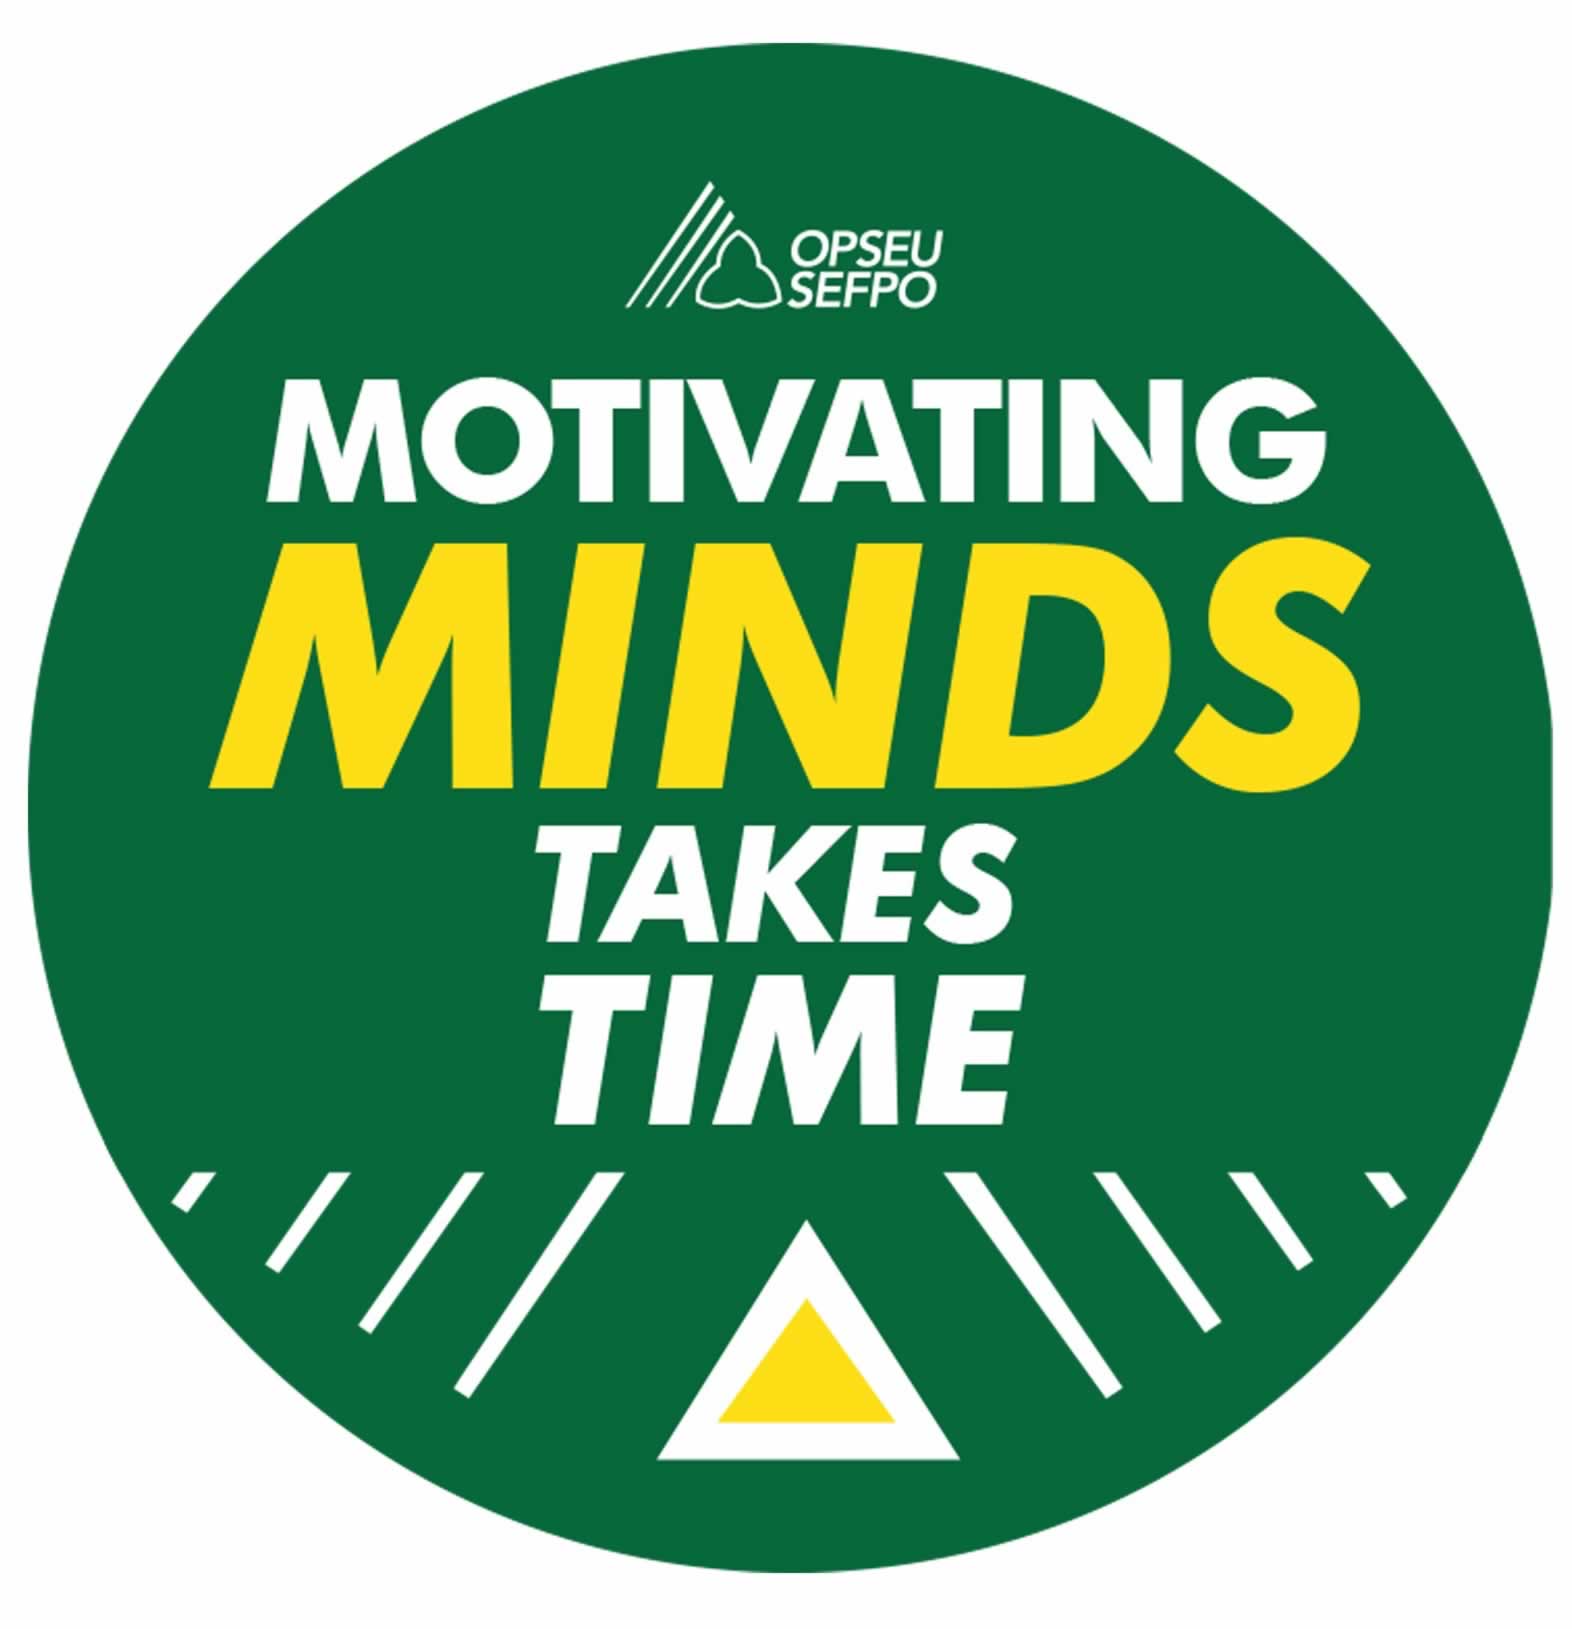 OPSEU - Motivating Minds Takes Time